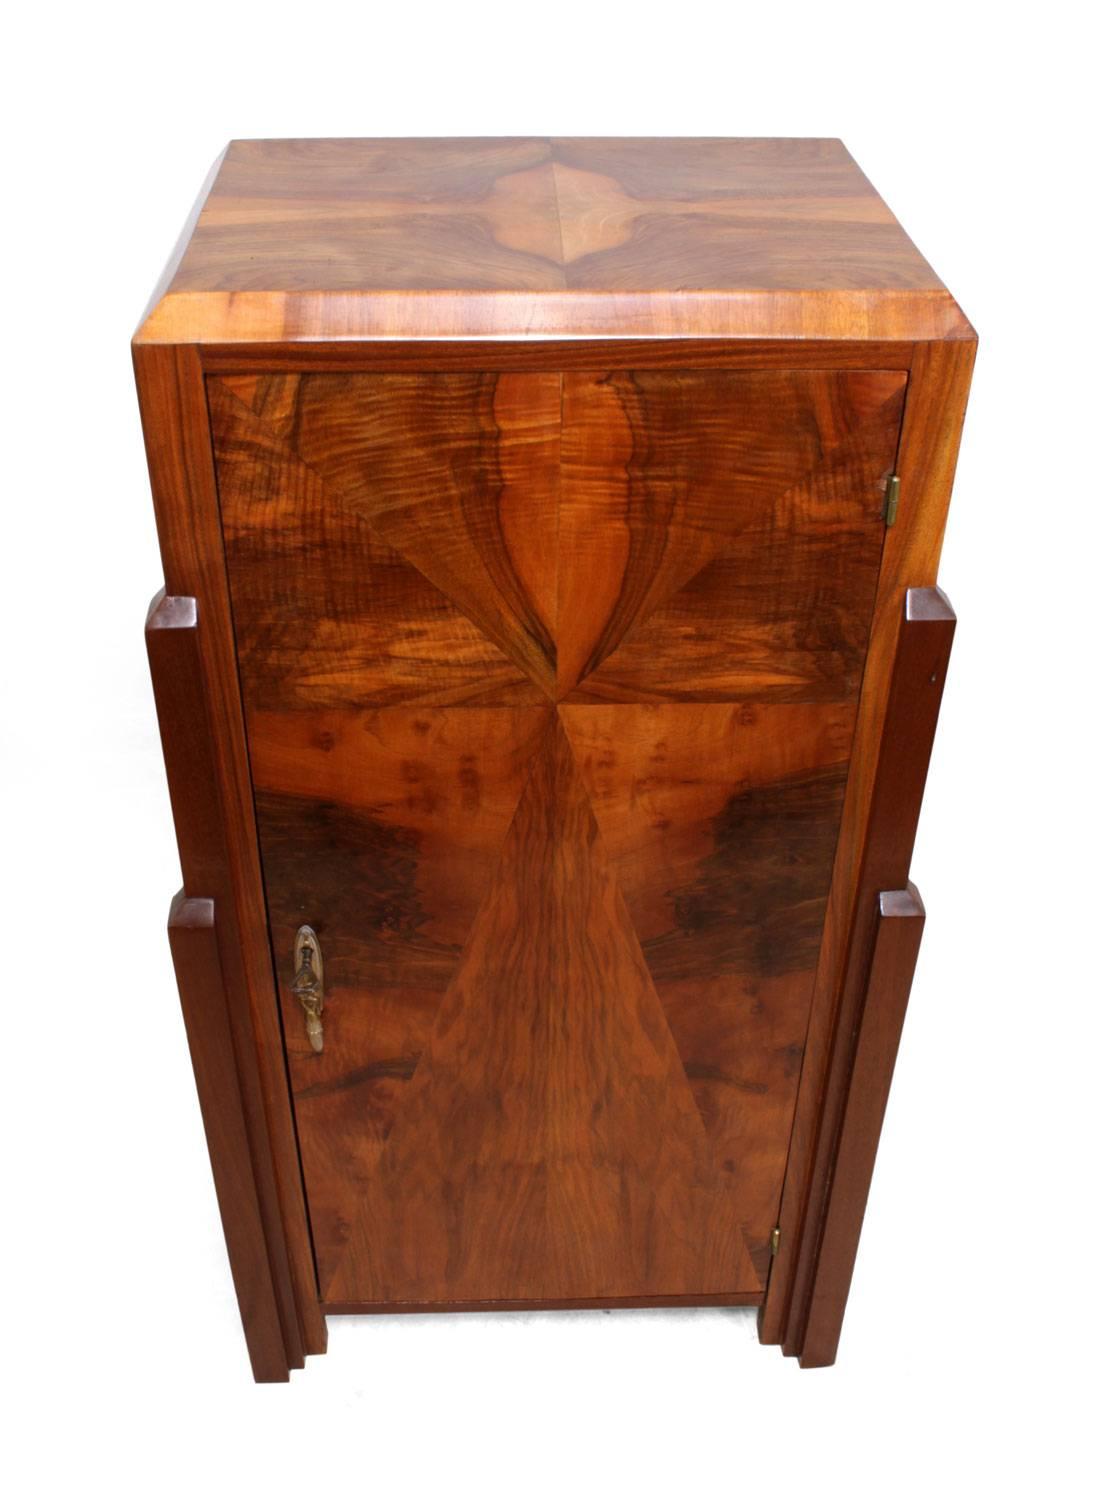 Art Deco walnut cabinet, circa 1930

This Art Deco single door walnut cabinet with shelves behind fully restored and polished and in very good condition

Age: 1930

Style: Art Deco

Material: Walnut

Condition: Very good

Dimensions: 106